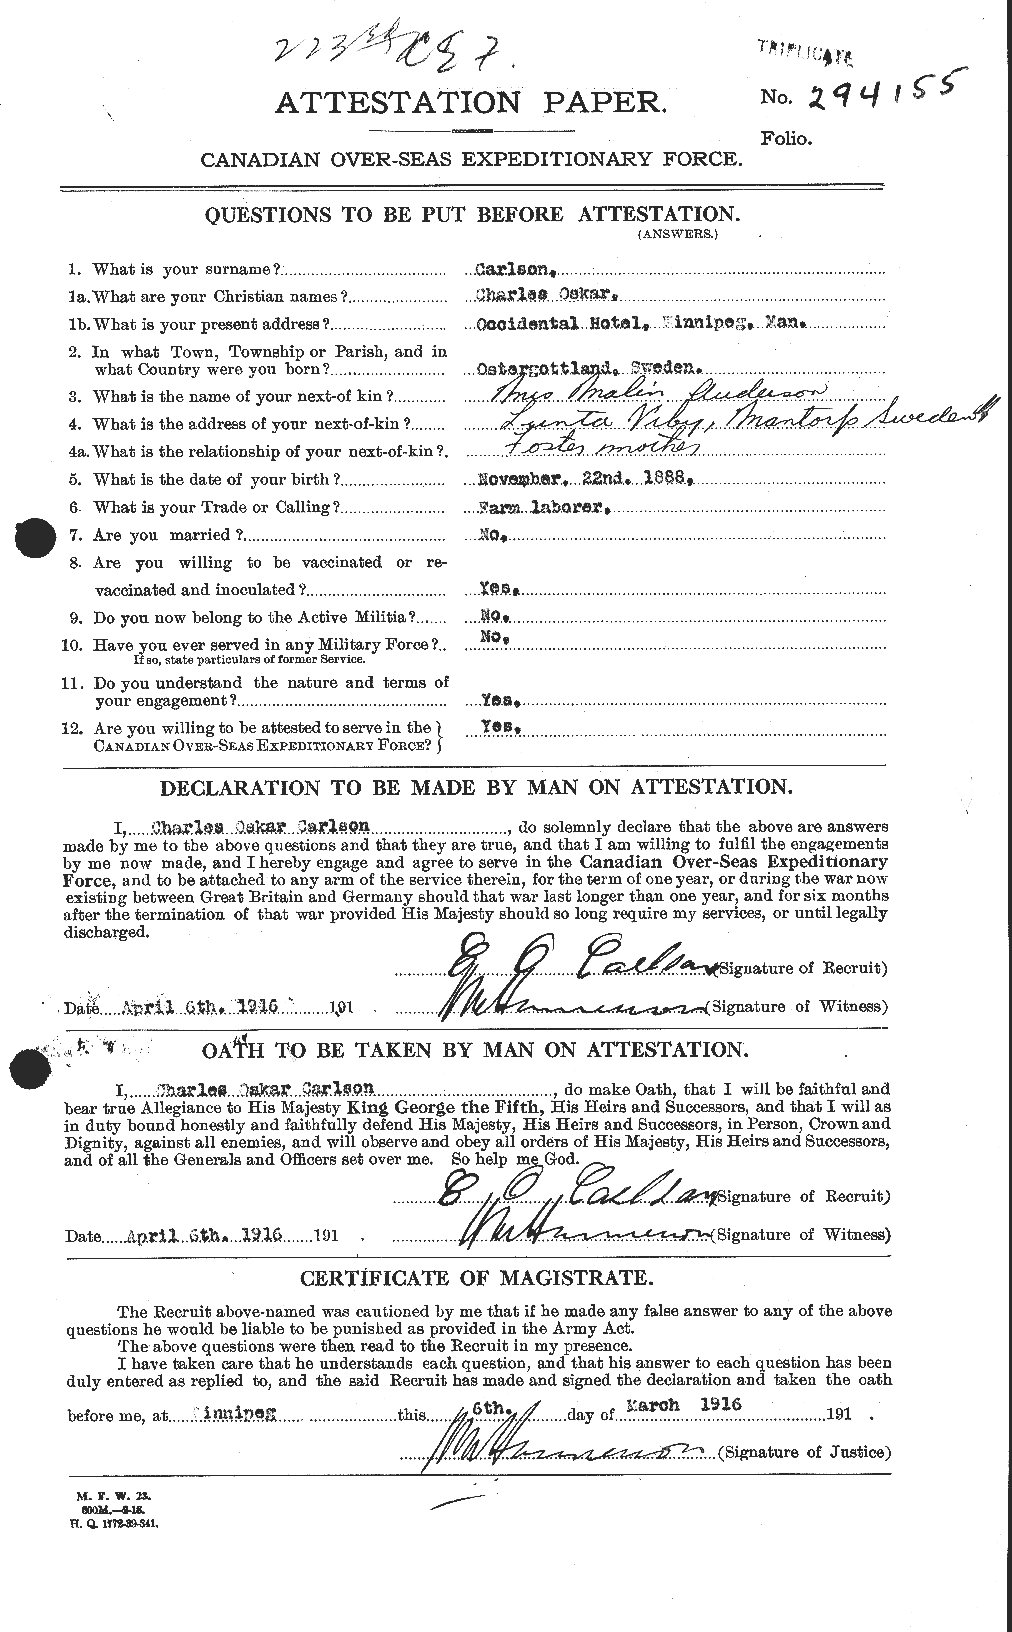 Personnel Records of the First World War - CEF 004516a